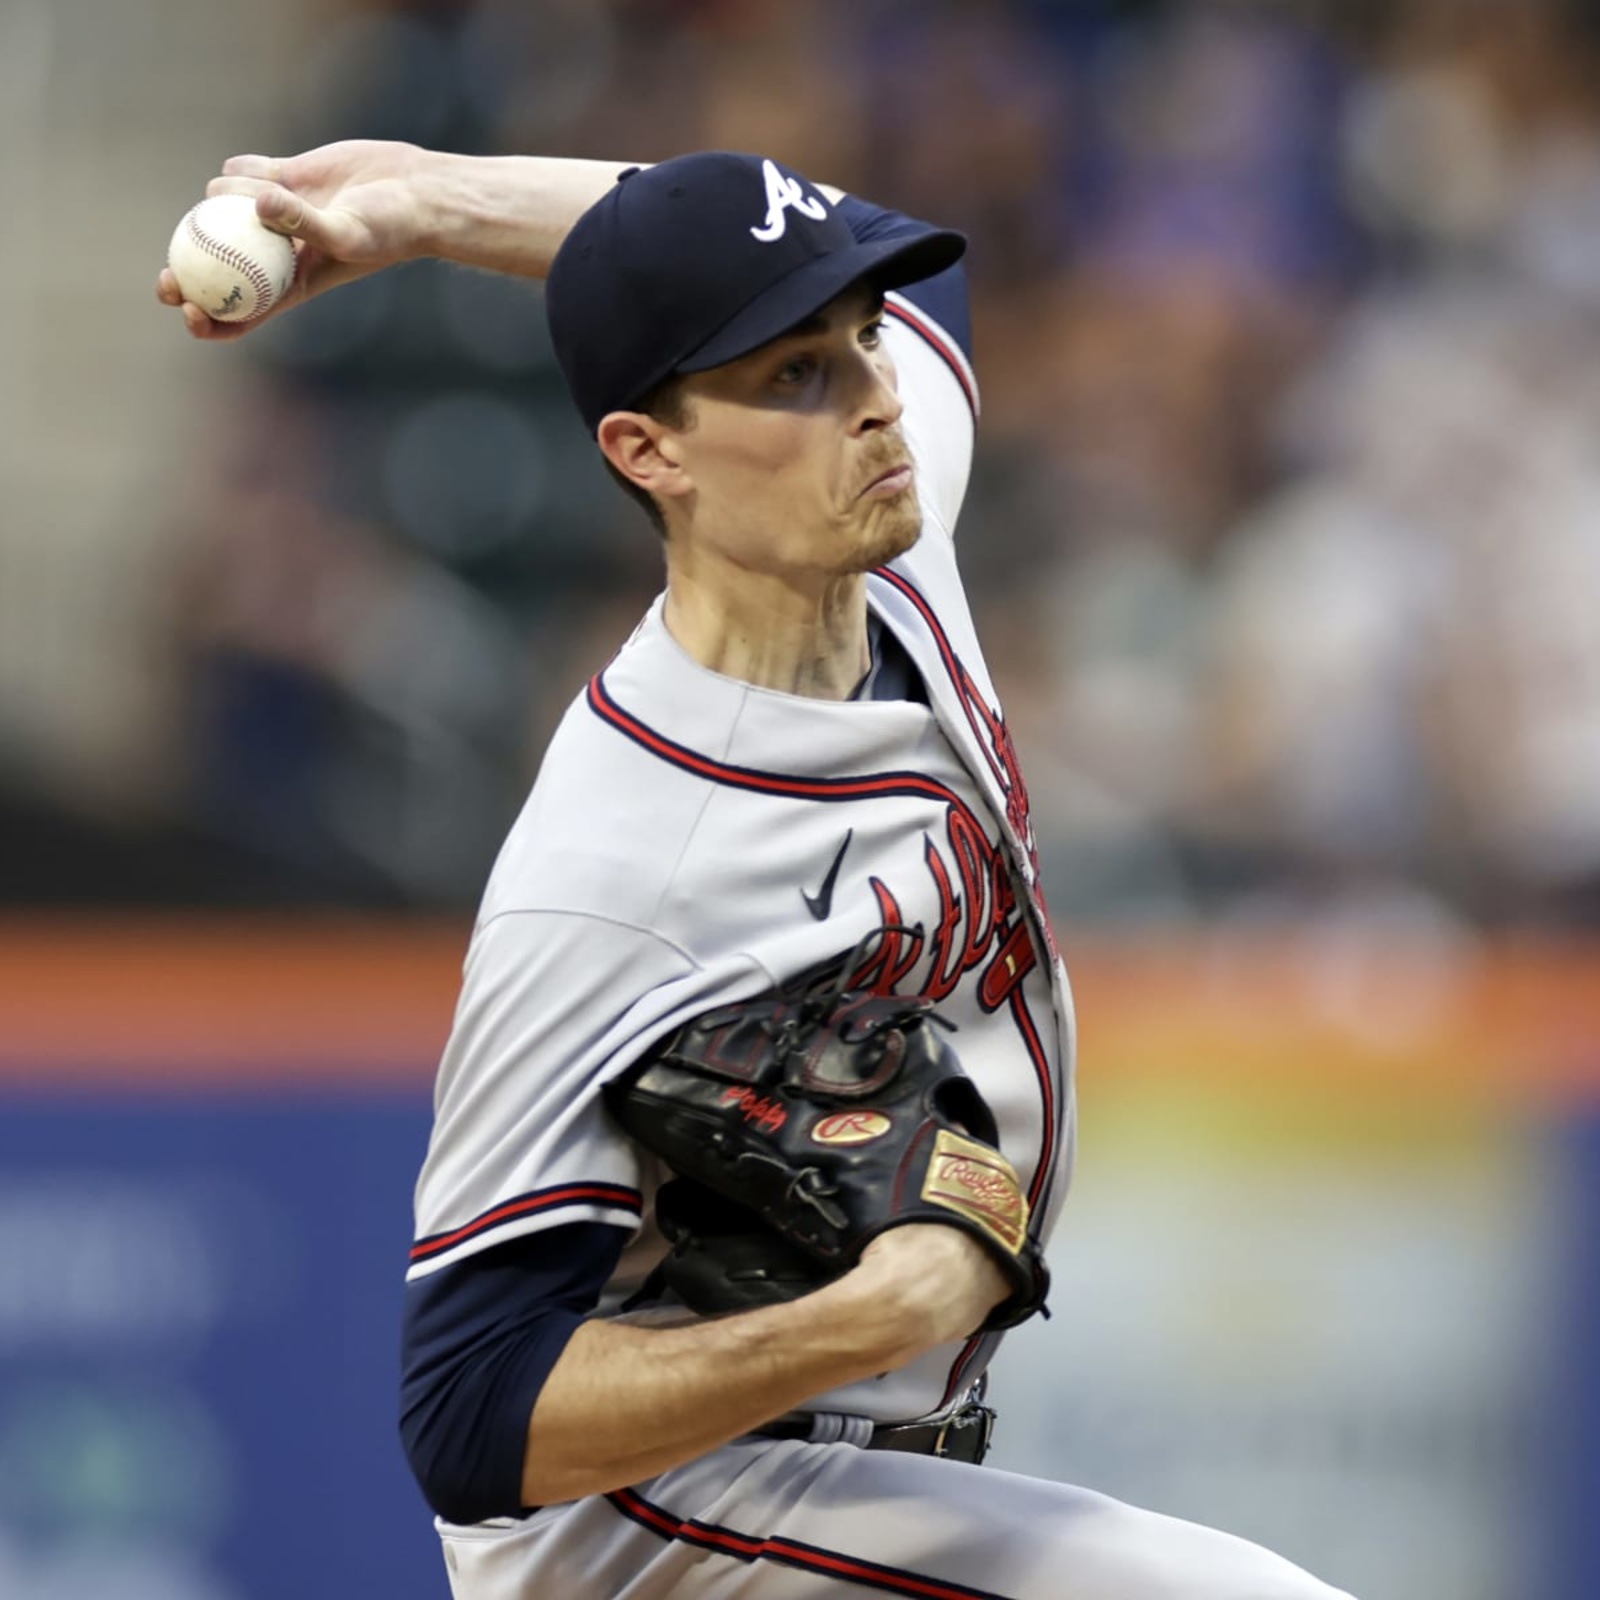 Where does MLB Network rank Max Fried among all starting